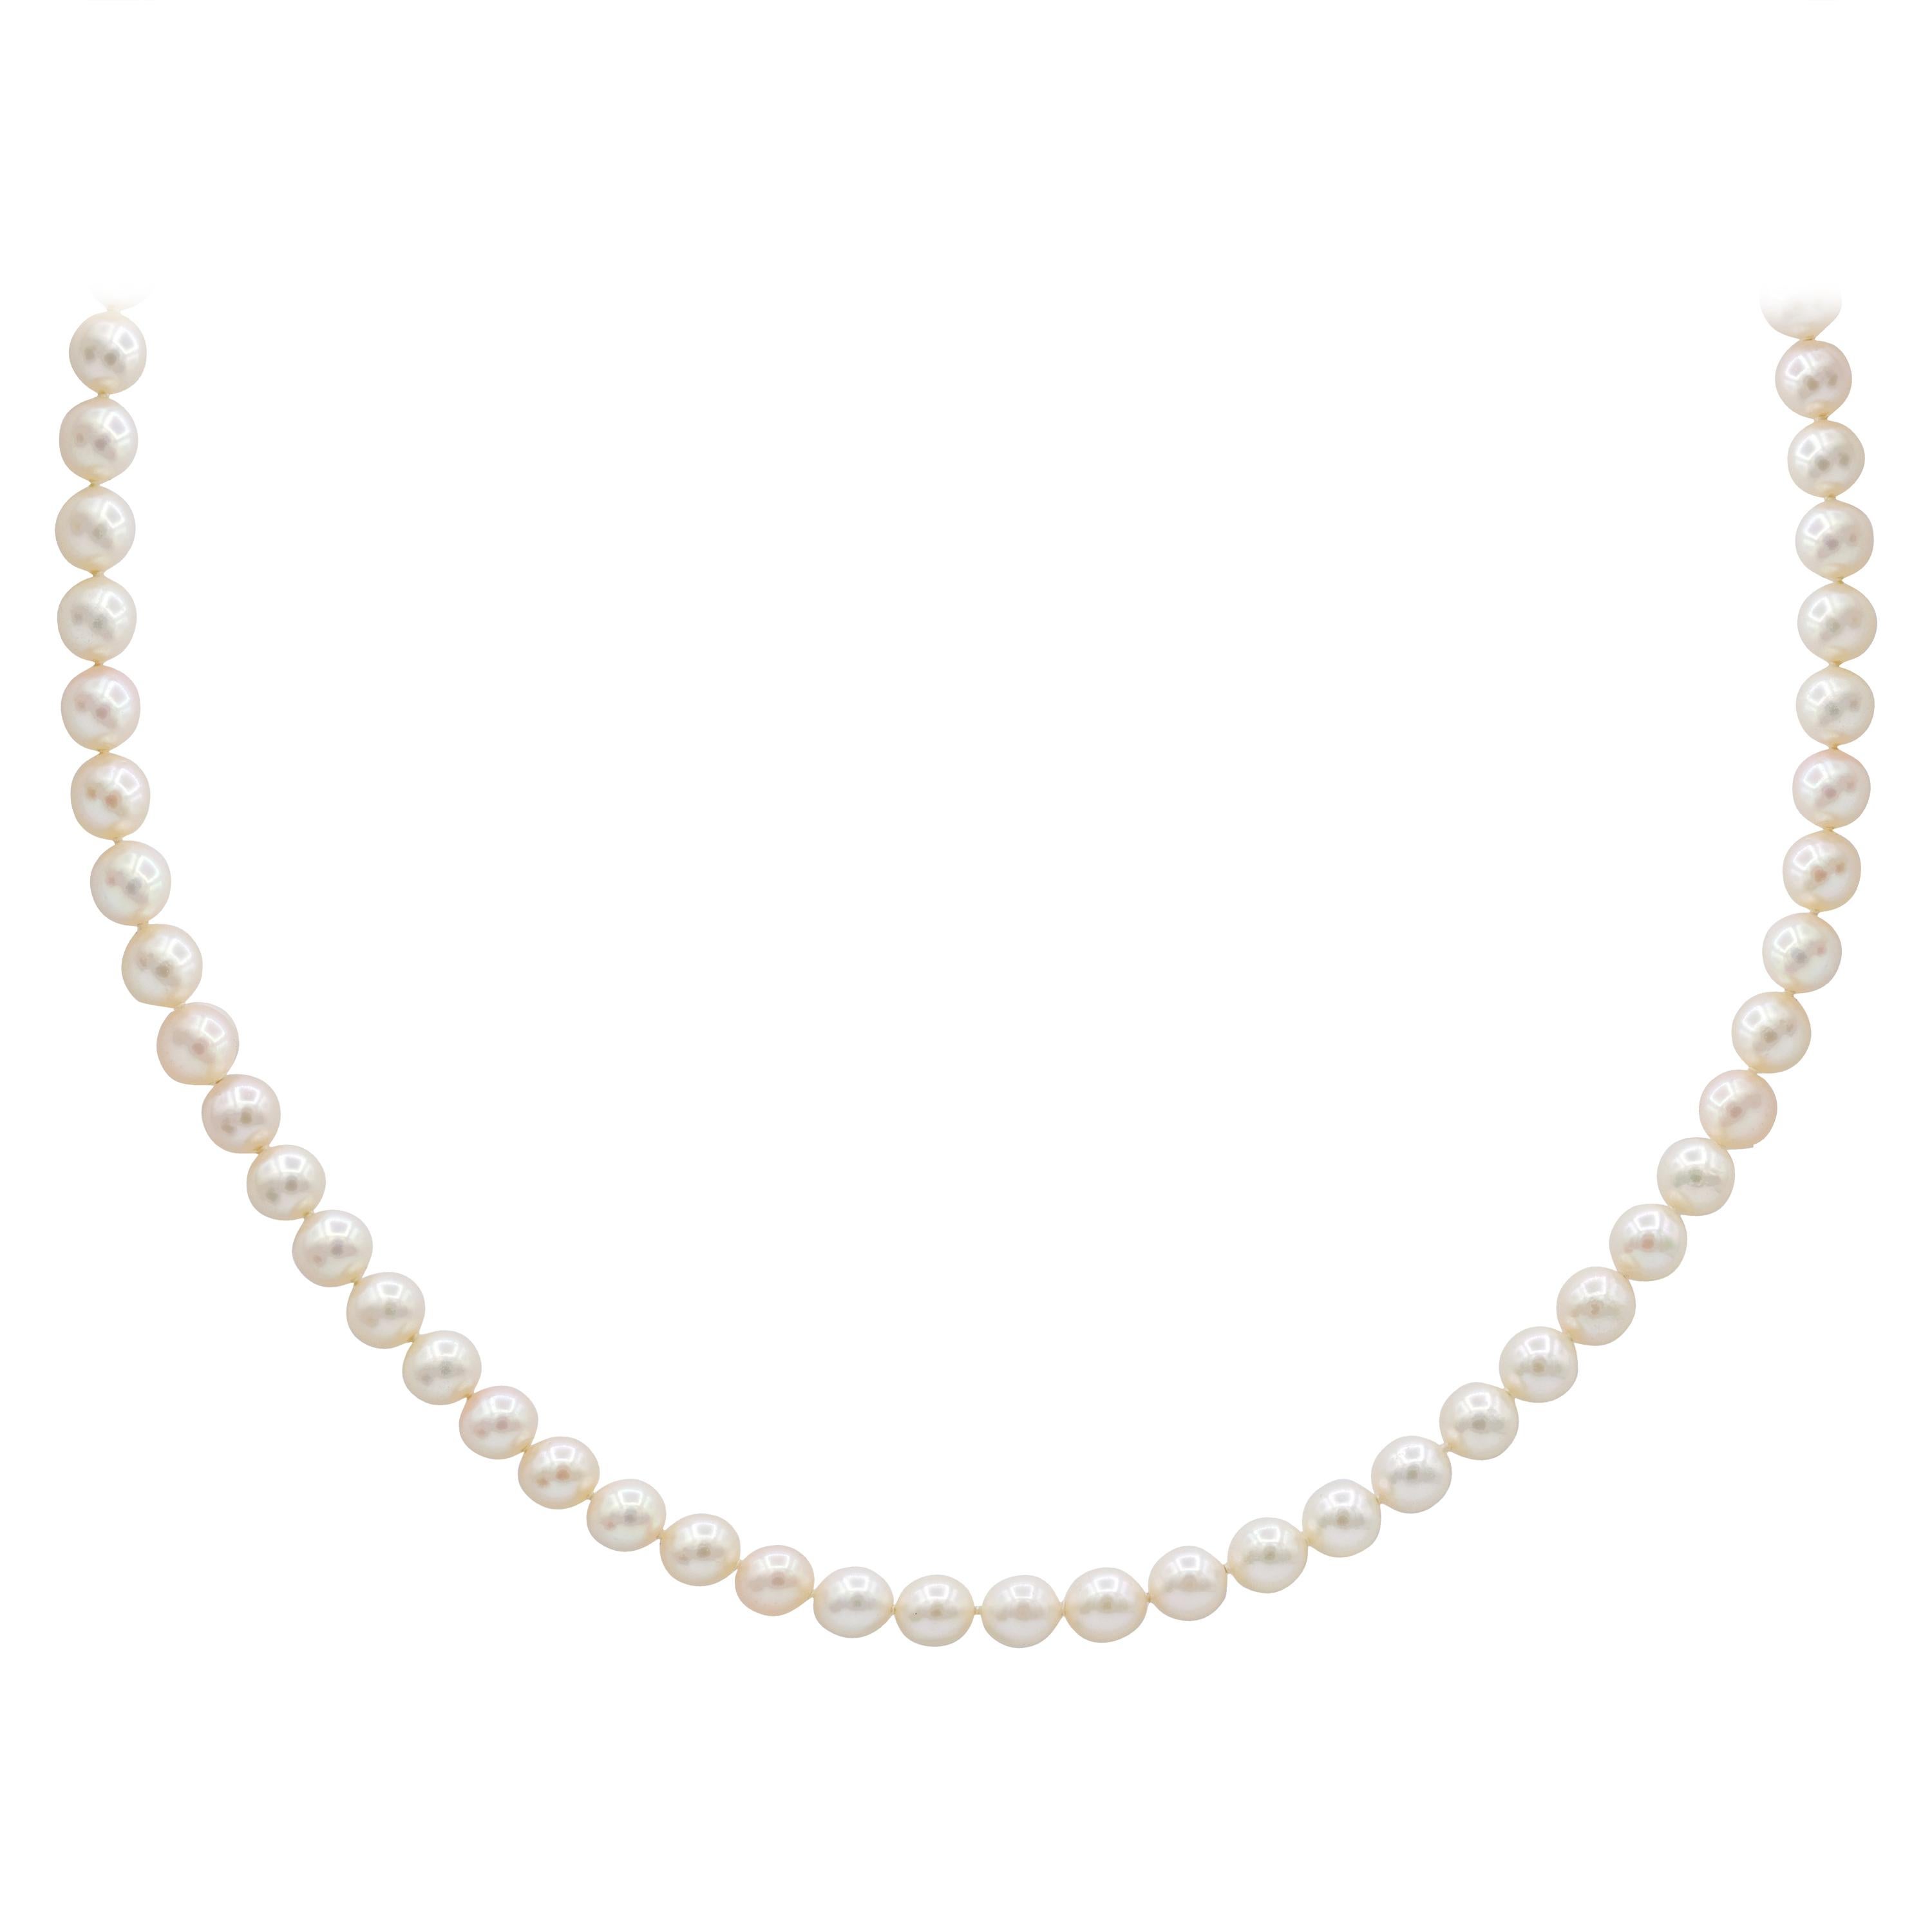 White Pearls Necklace with a Clasp, Features Round Diamonds For Sale